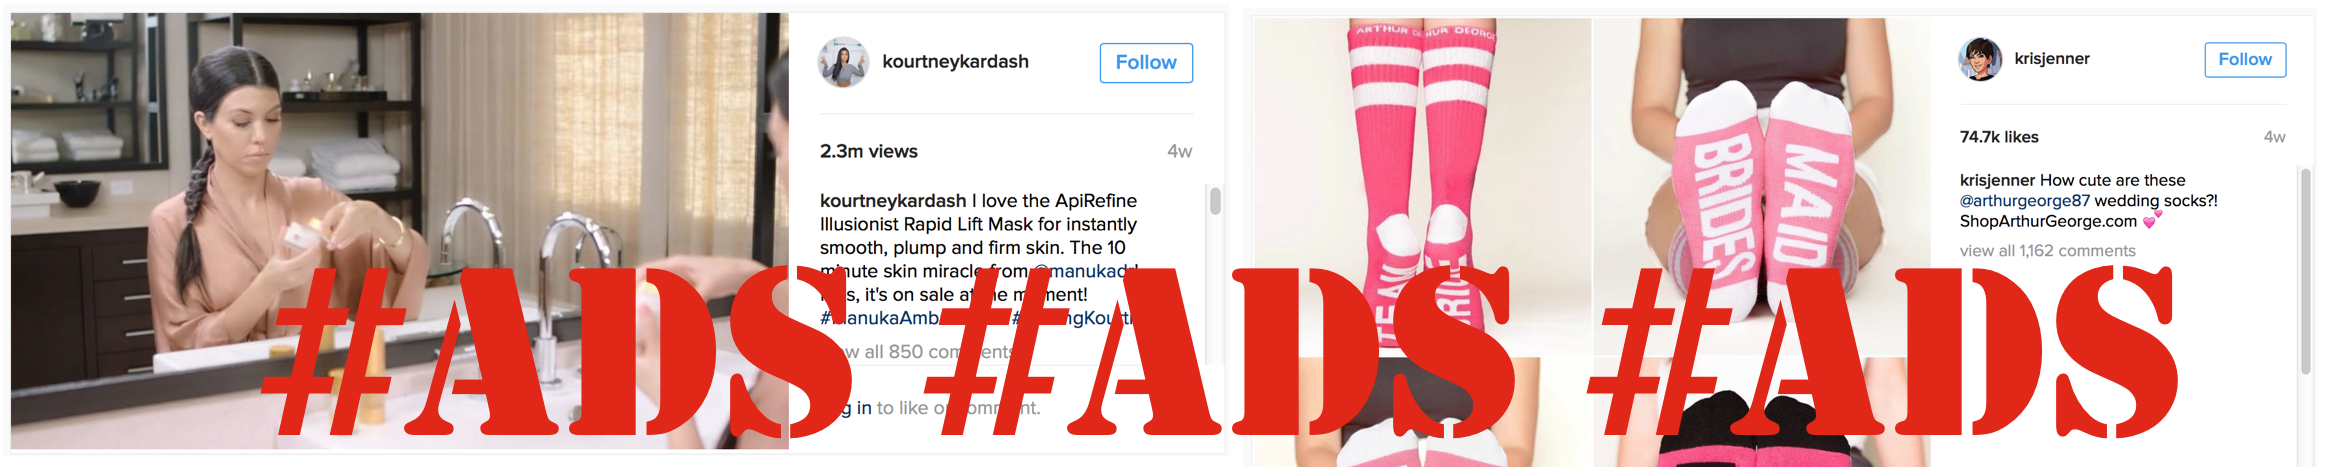 Is It Time To Get Serious About Cracking Down On Stealth Instagram Ads?